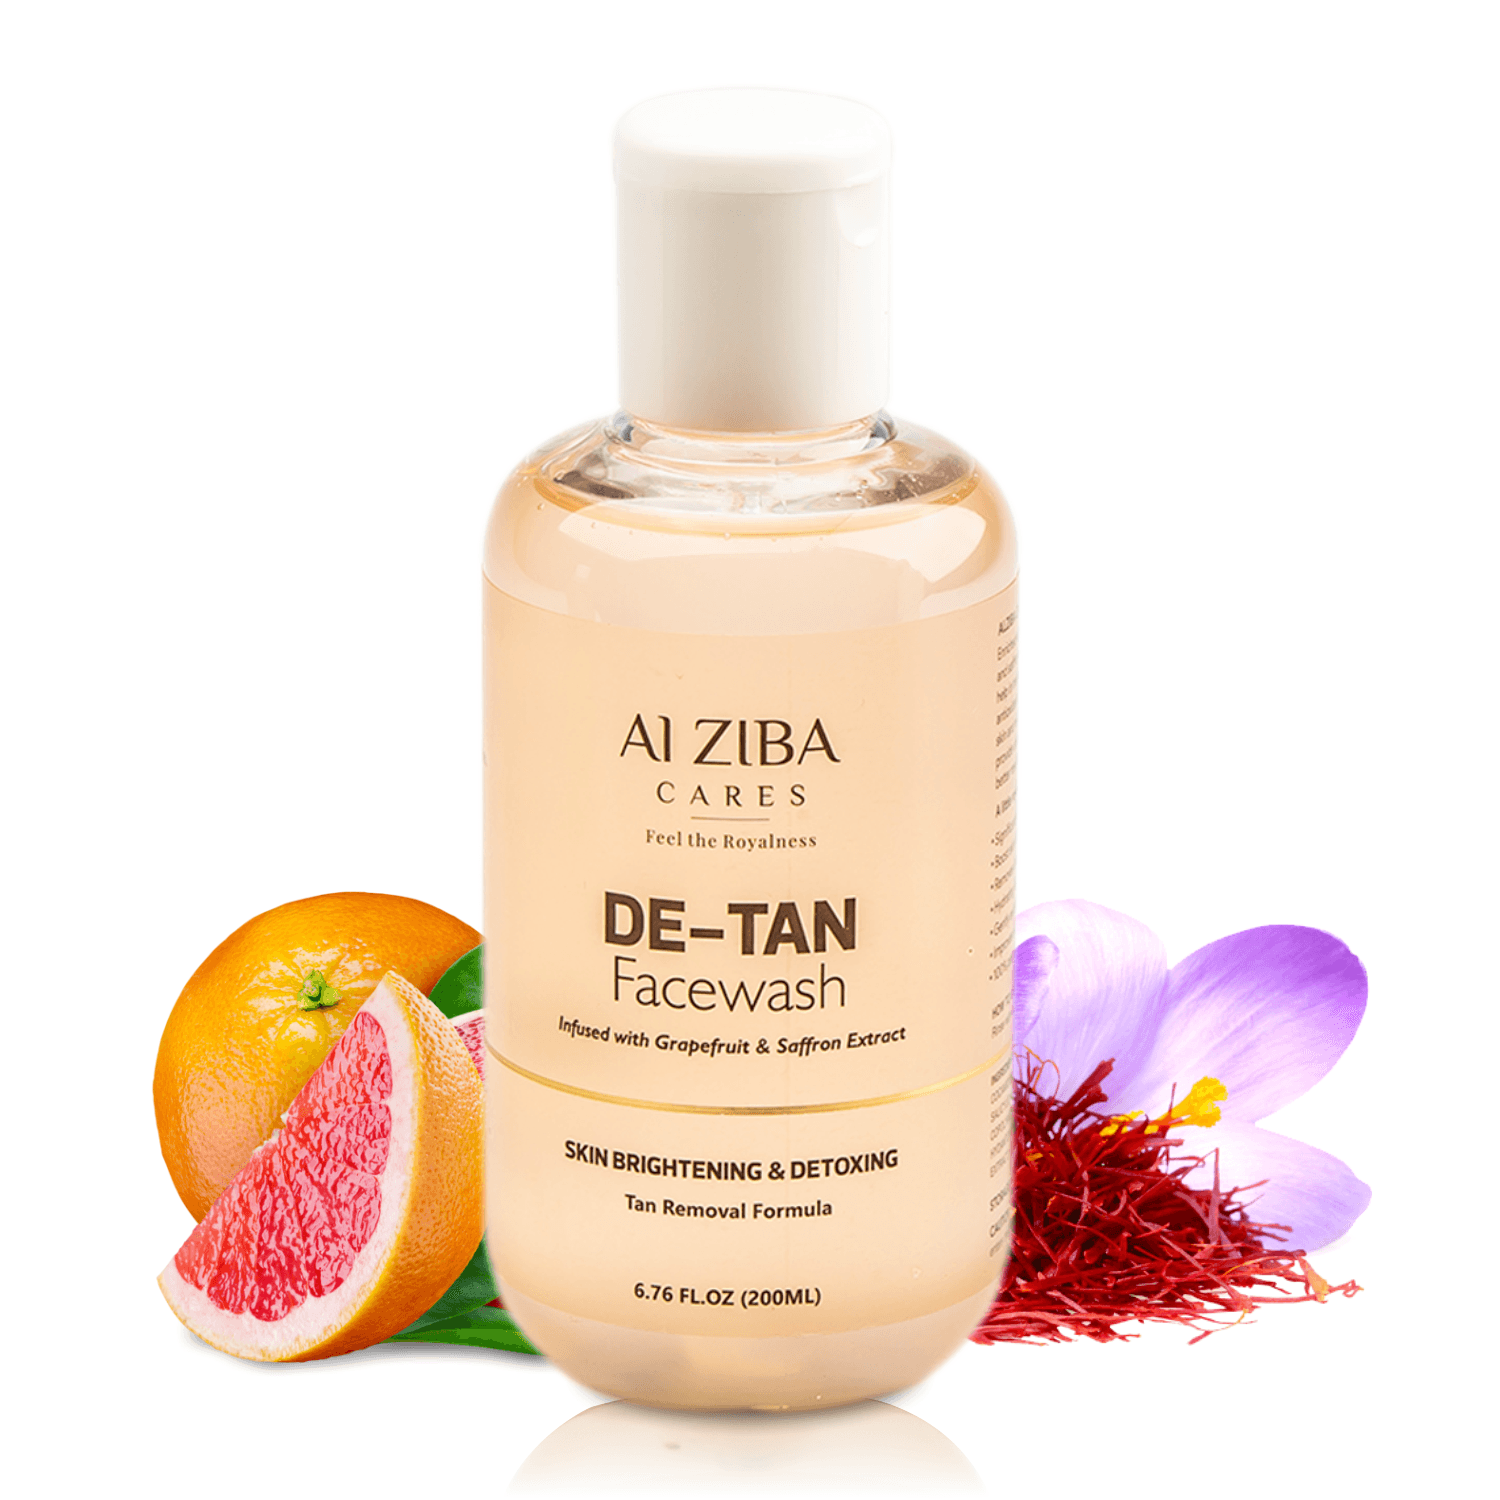 De-Tan Face Wash infused with Grapefruit and Saffron Extract, Skin Brightening, Detoxing and Tan Removal Formula - 200 ML - ALZIBA CARES